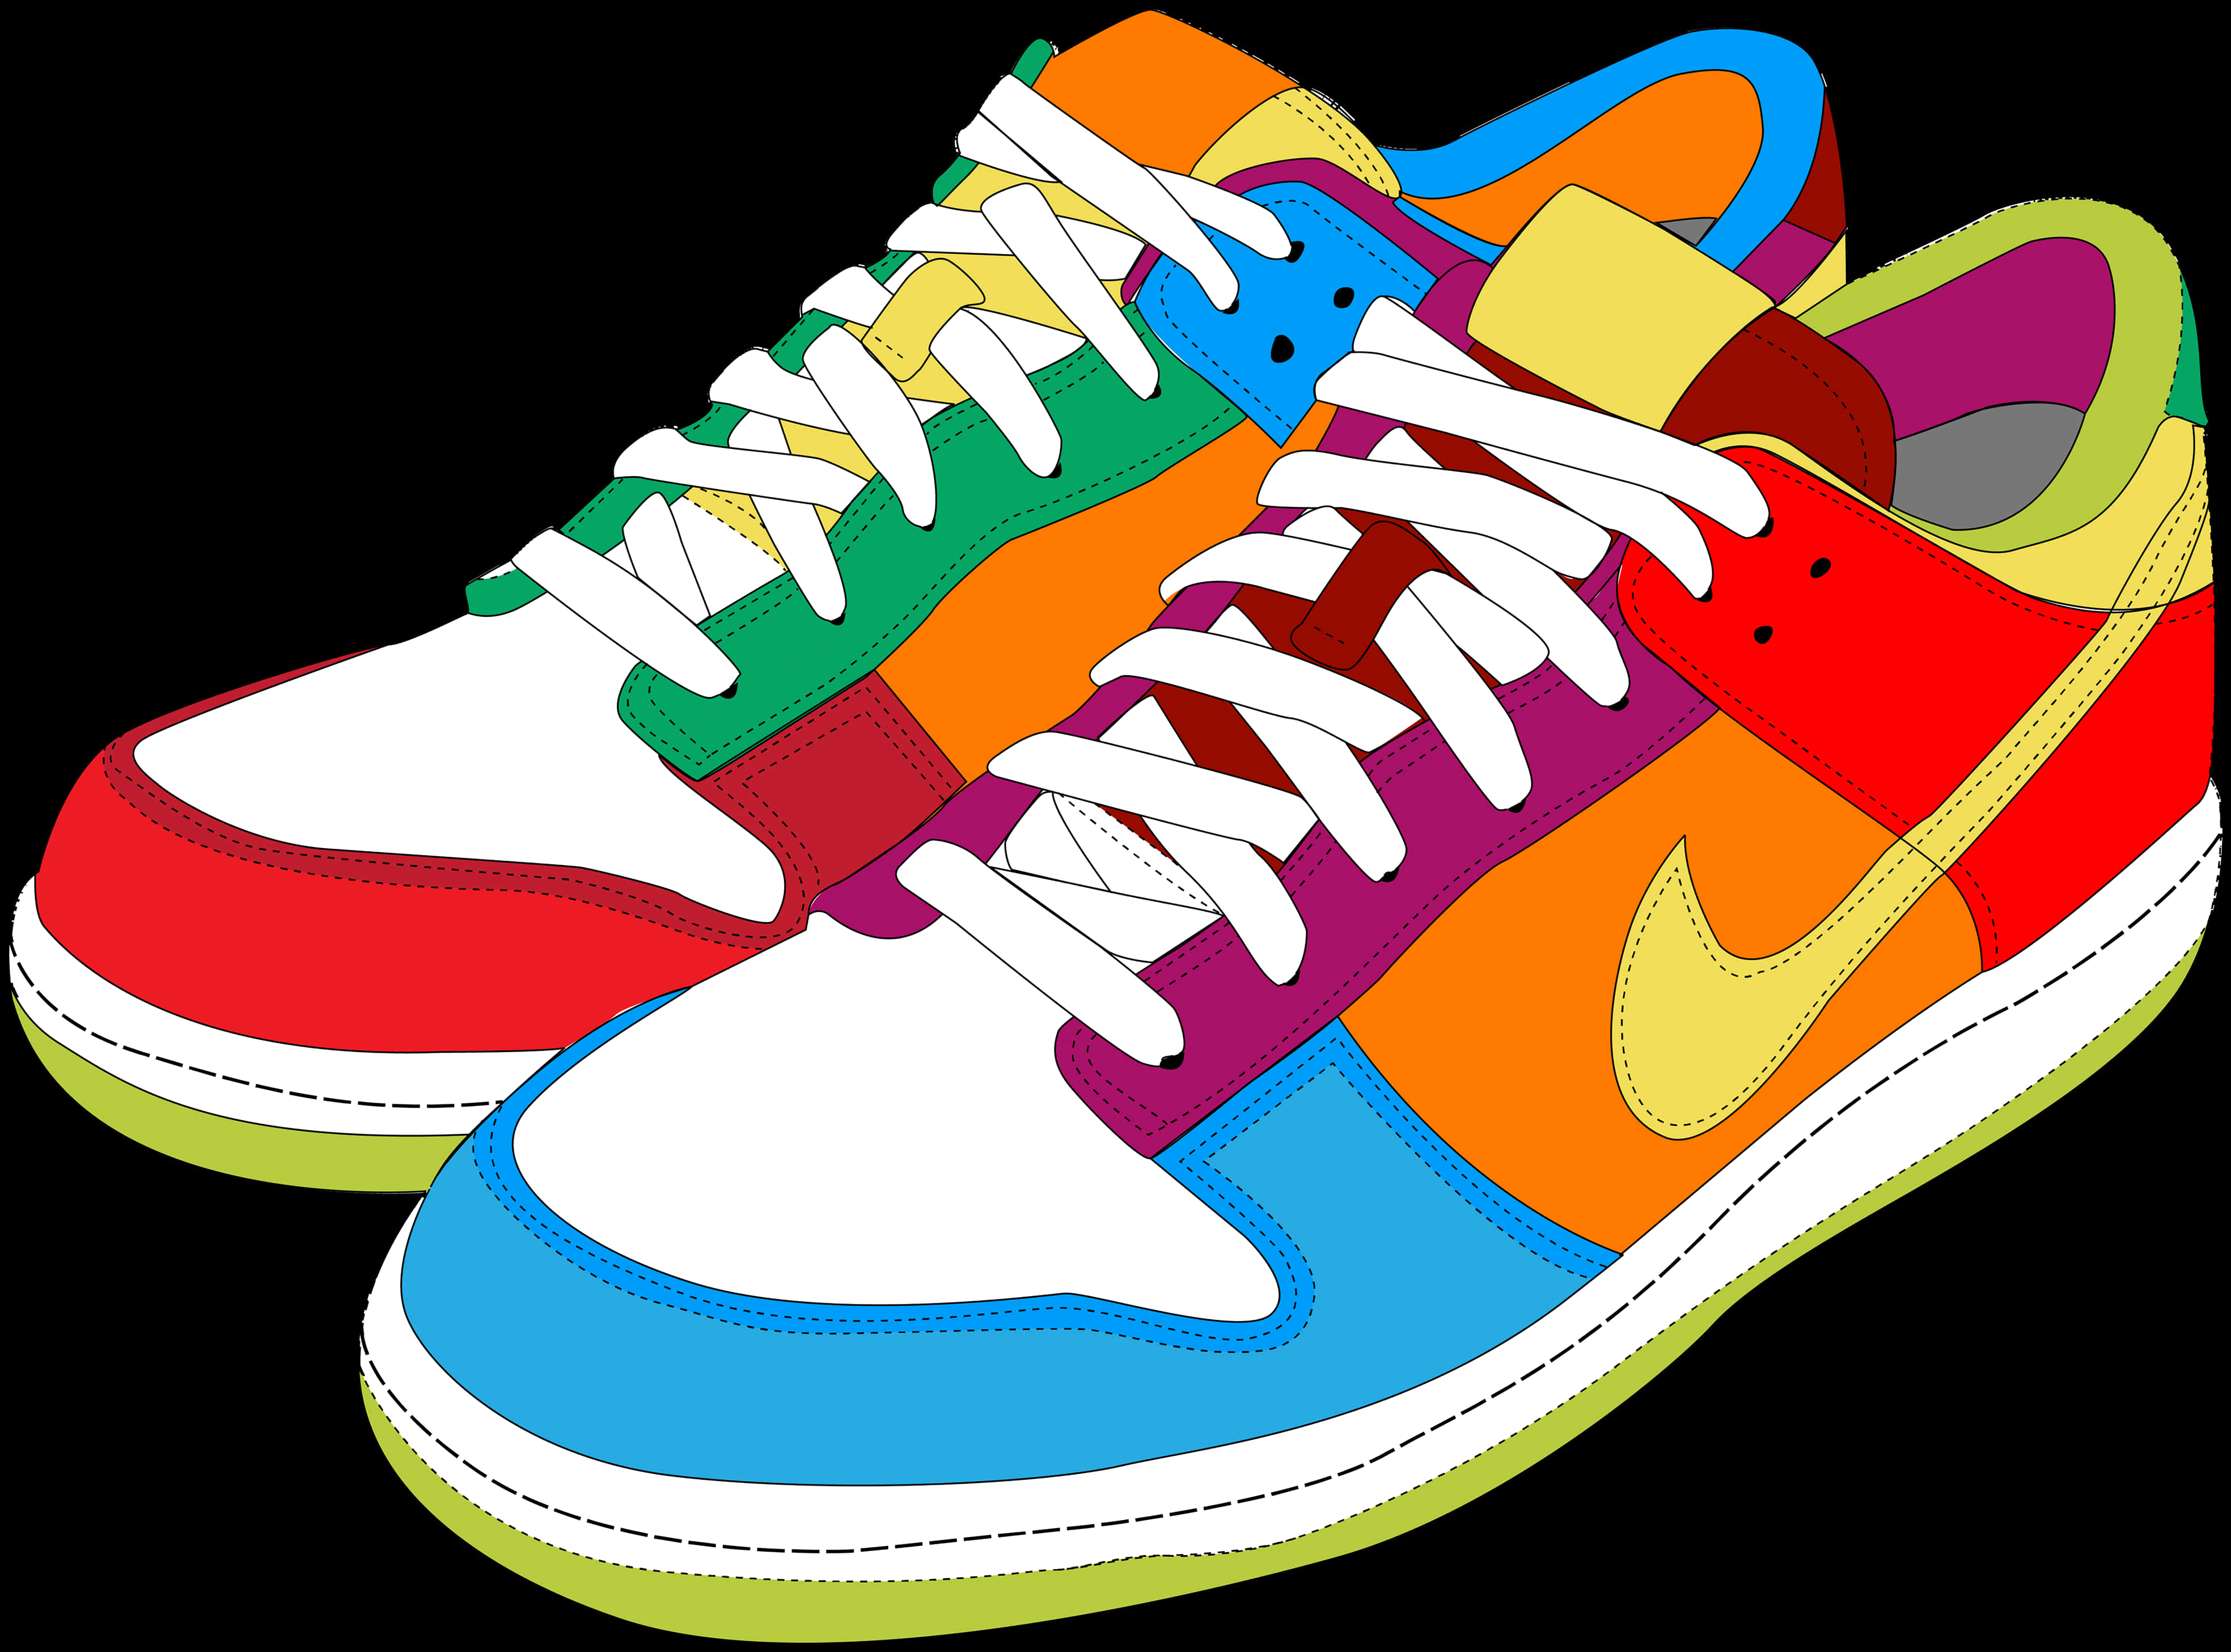 Colorful Sneakers Illustration PNG